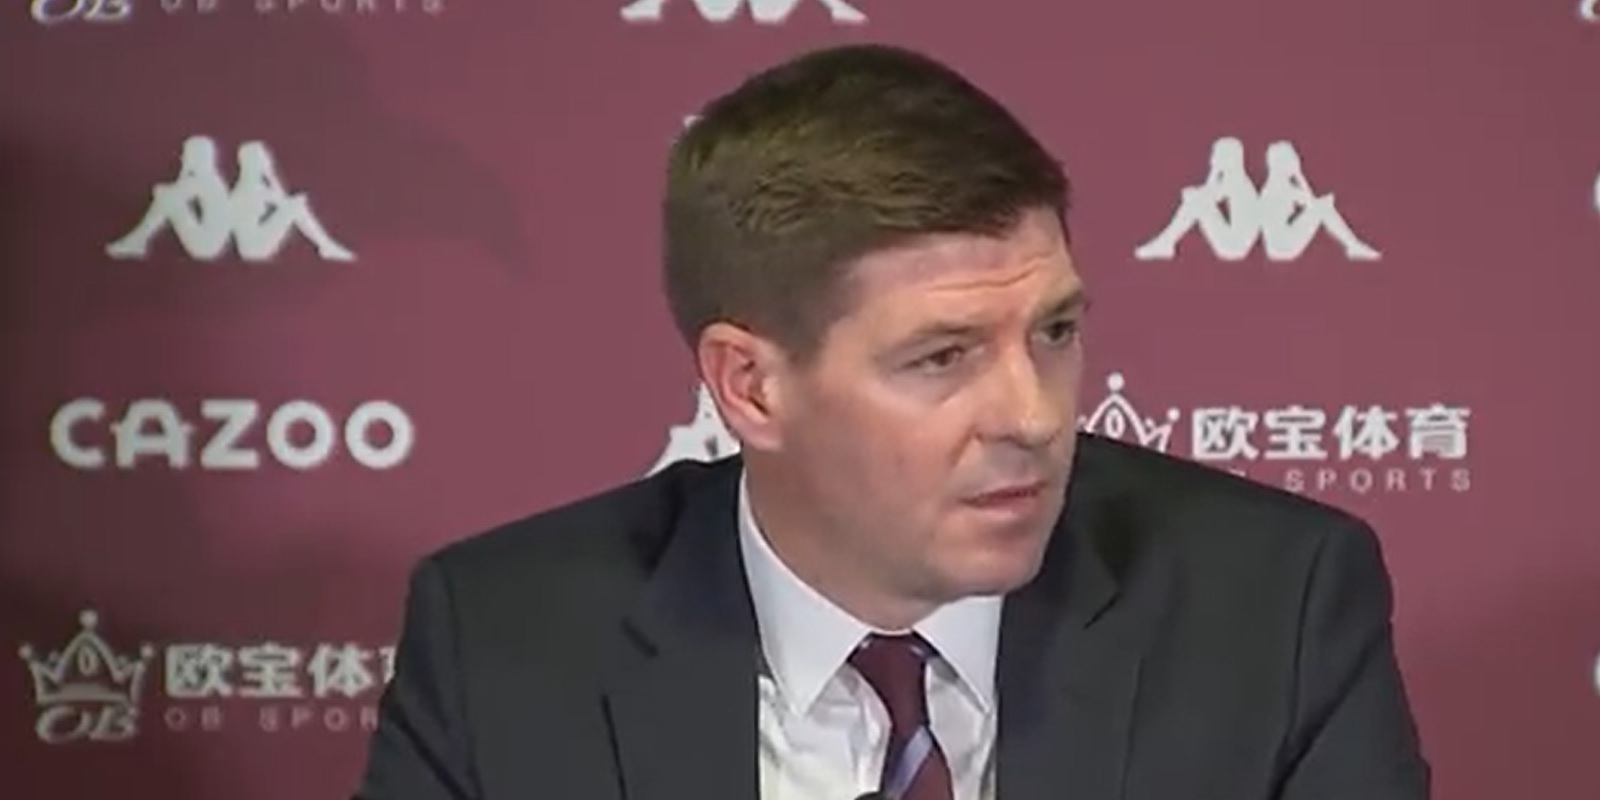 Gerrard puts a reporter in his place over ‘very unfair’ Liverpool comment